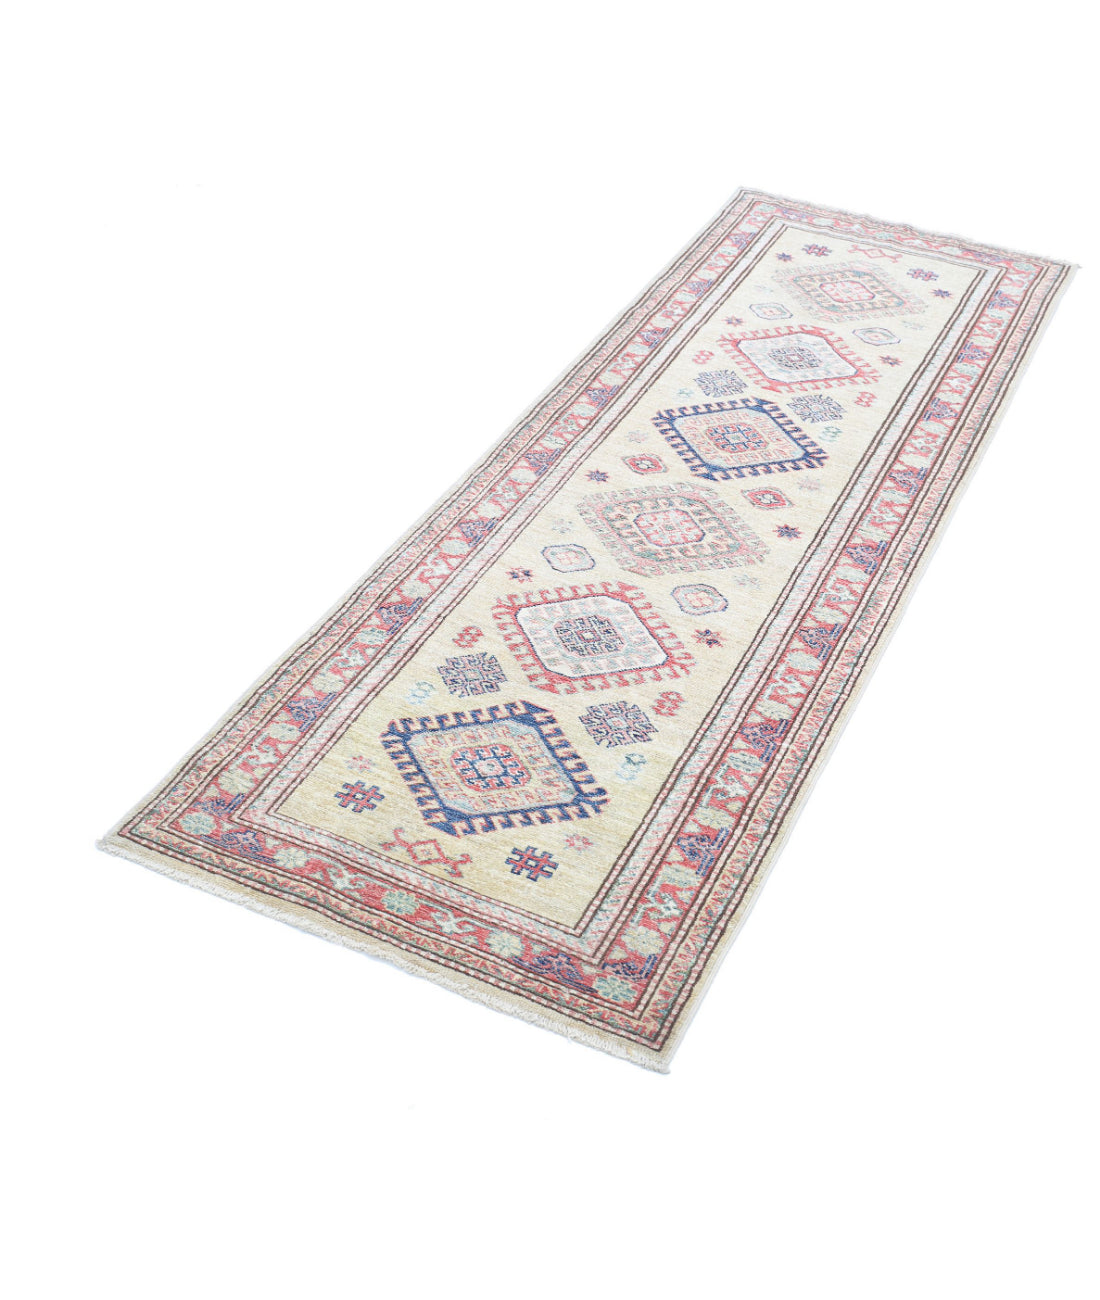 Hand Knotted Royal Kazak Wool Rug - 2'4'' x 6'10'' 2'4'' x 6'10'' (70 X 205) / Beige / Red